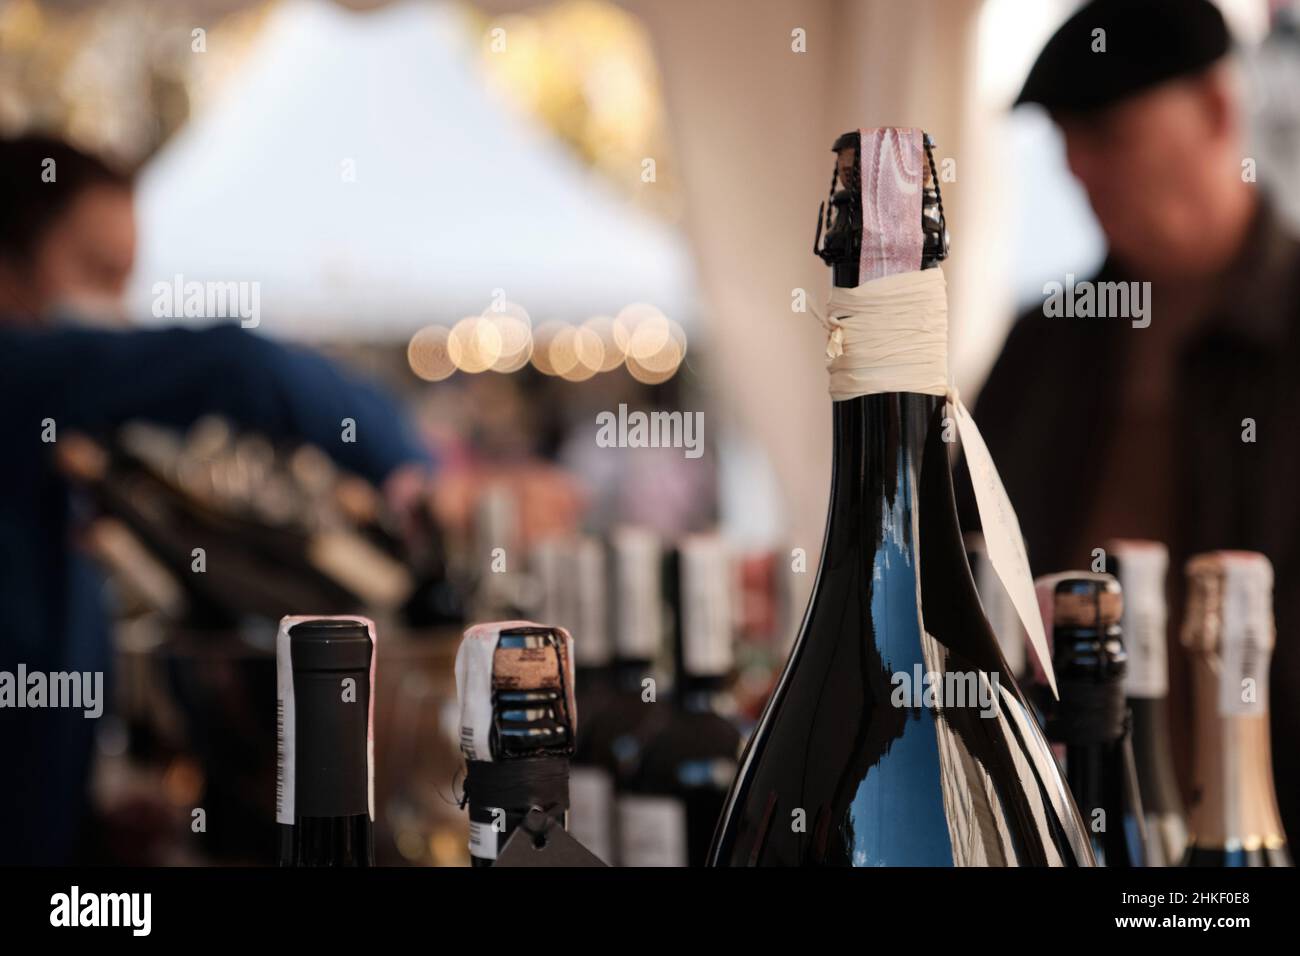 A closeup shot of bottles display at exhibitor stand at food and wine fair. Stock Photo